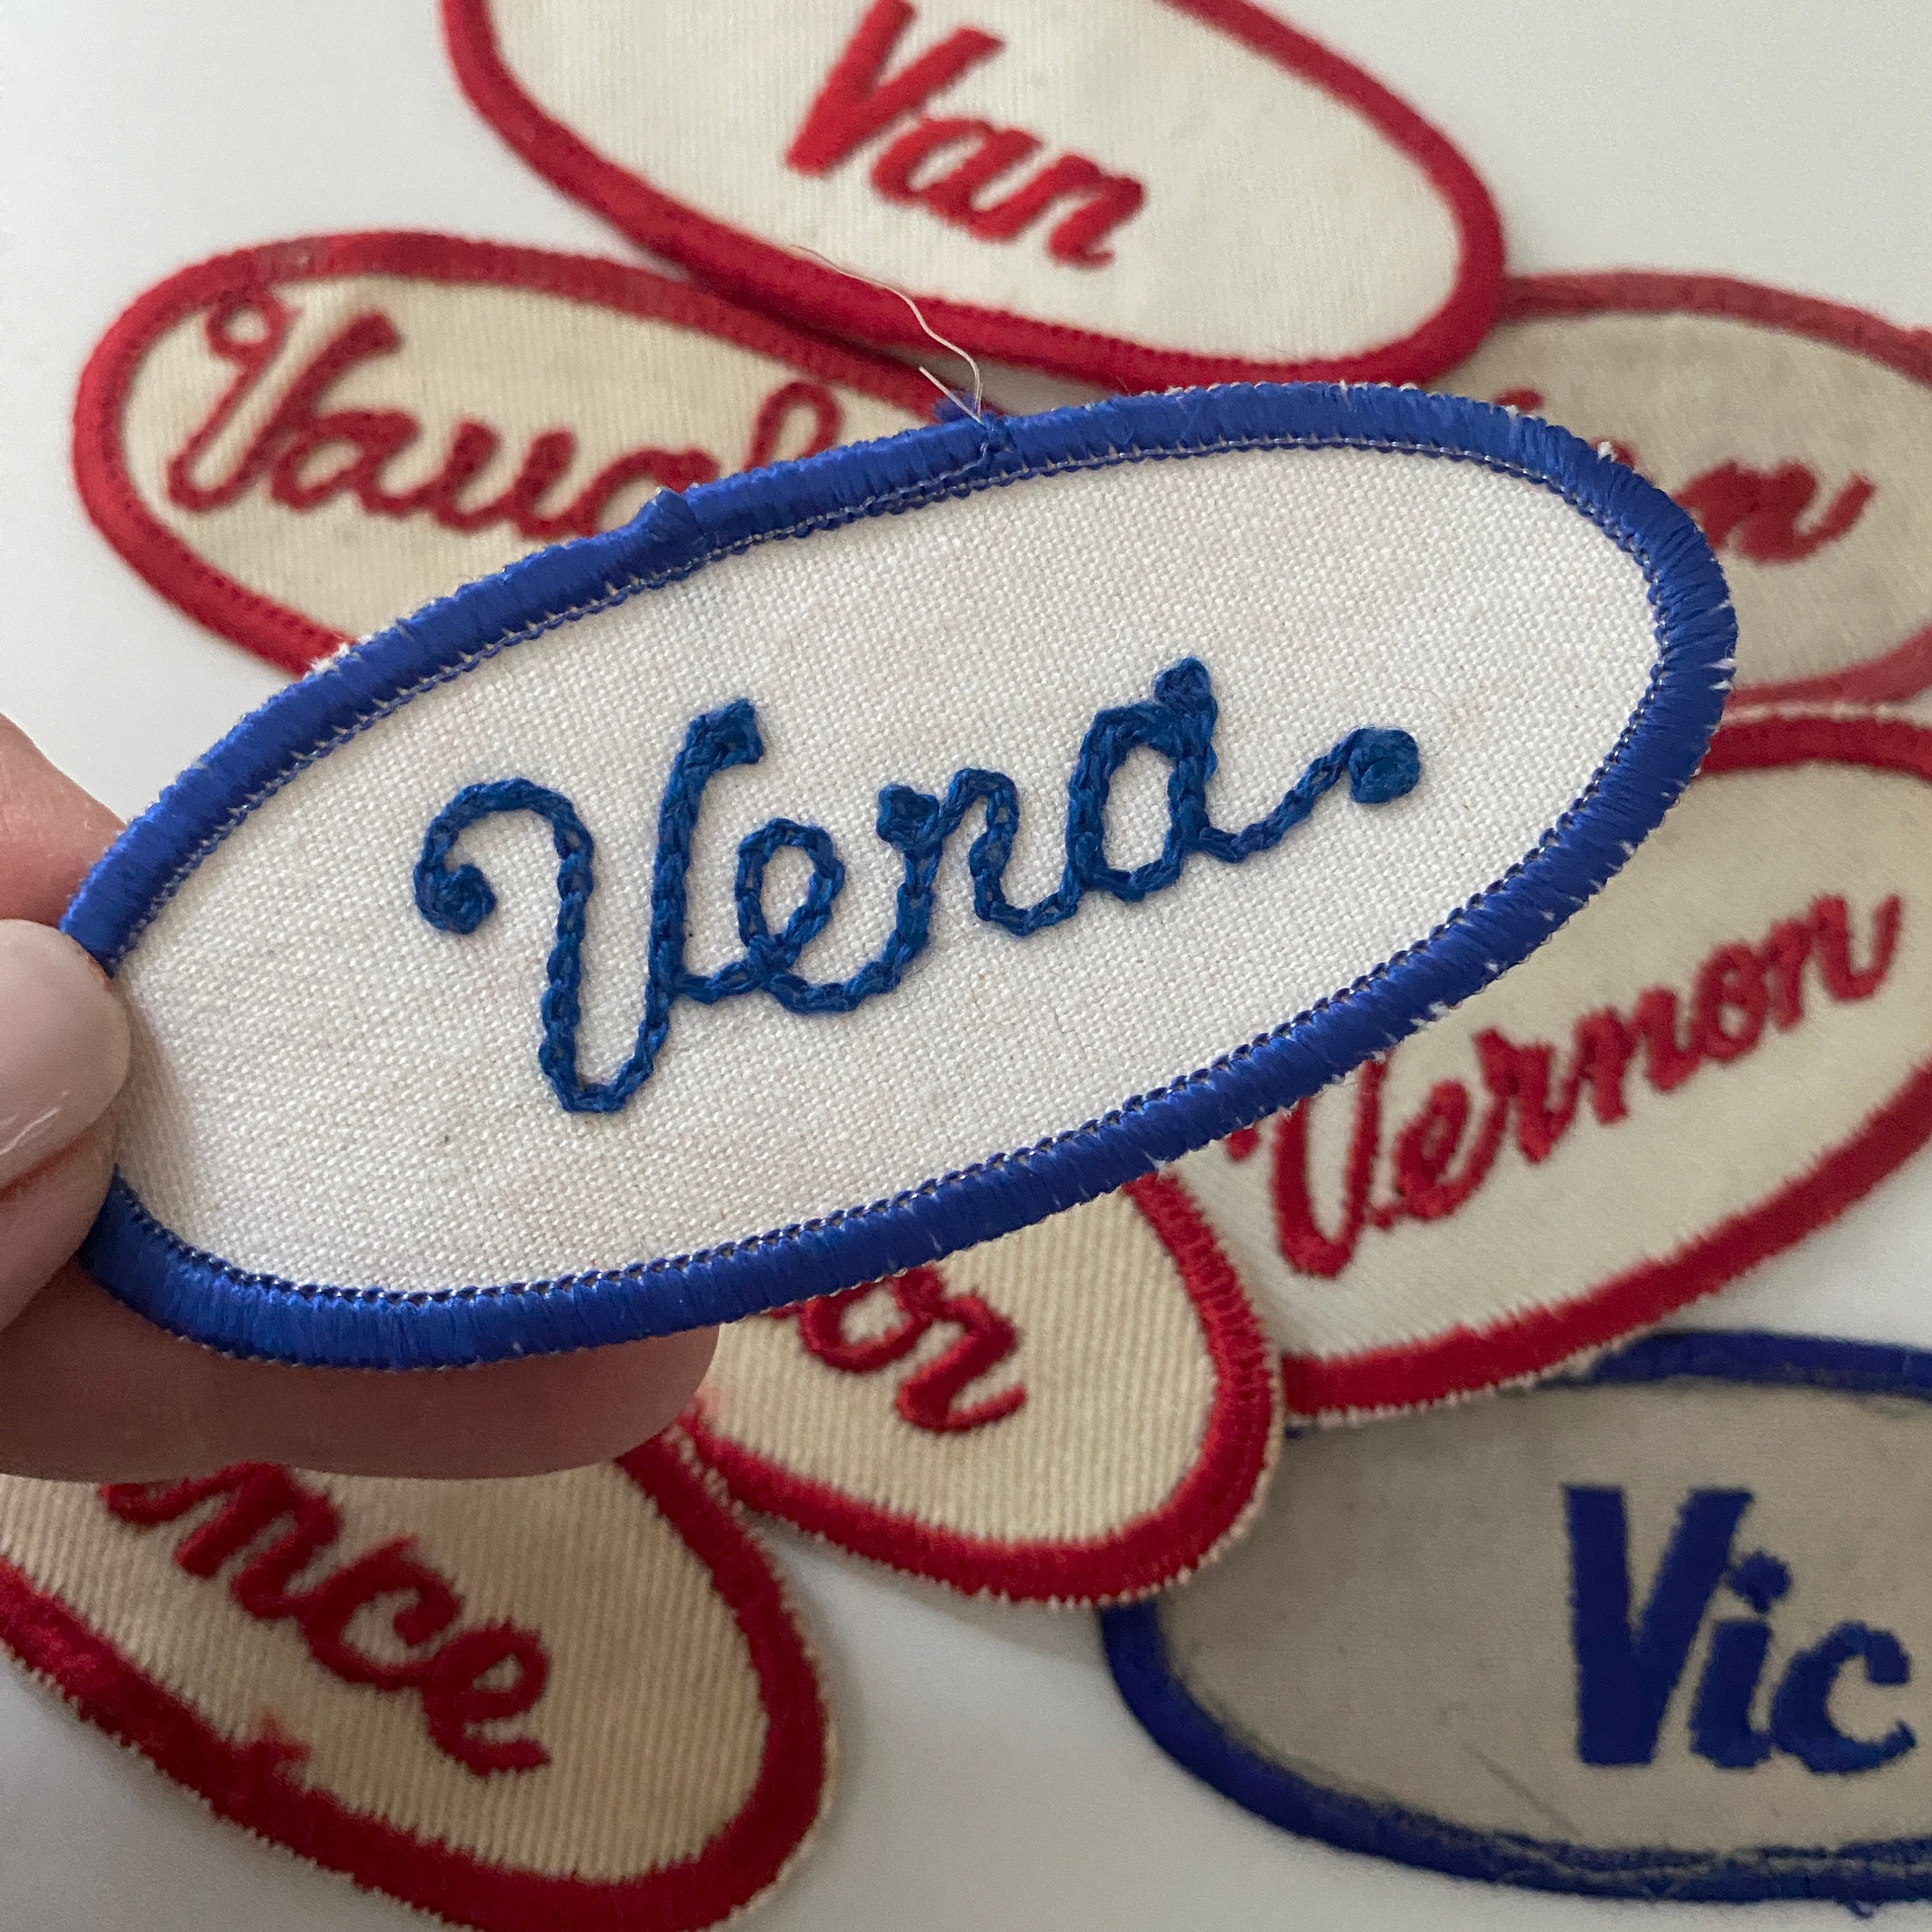 NEW NAMES Vintage Embroidered Oval Uniform Name Patches Fun Names CHOOSE  One Industrial Work Shirt Vintage Supply Free Shipping 